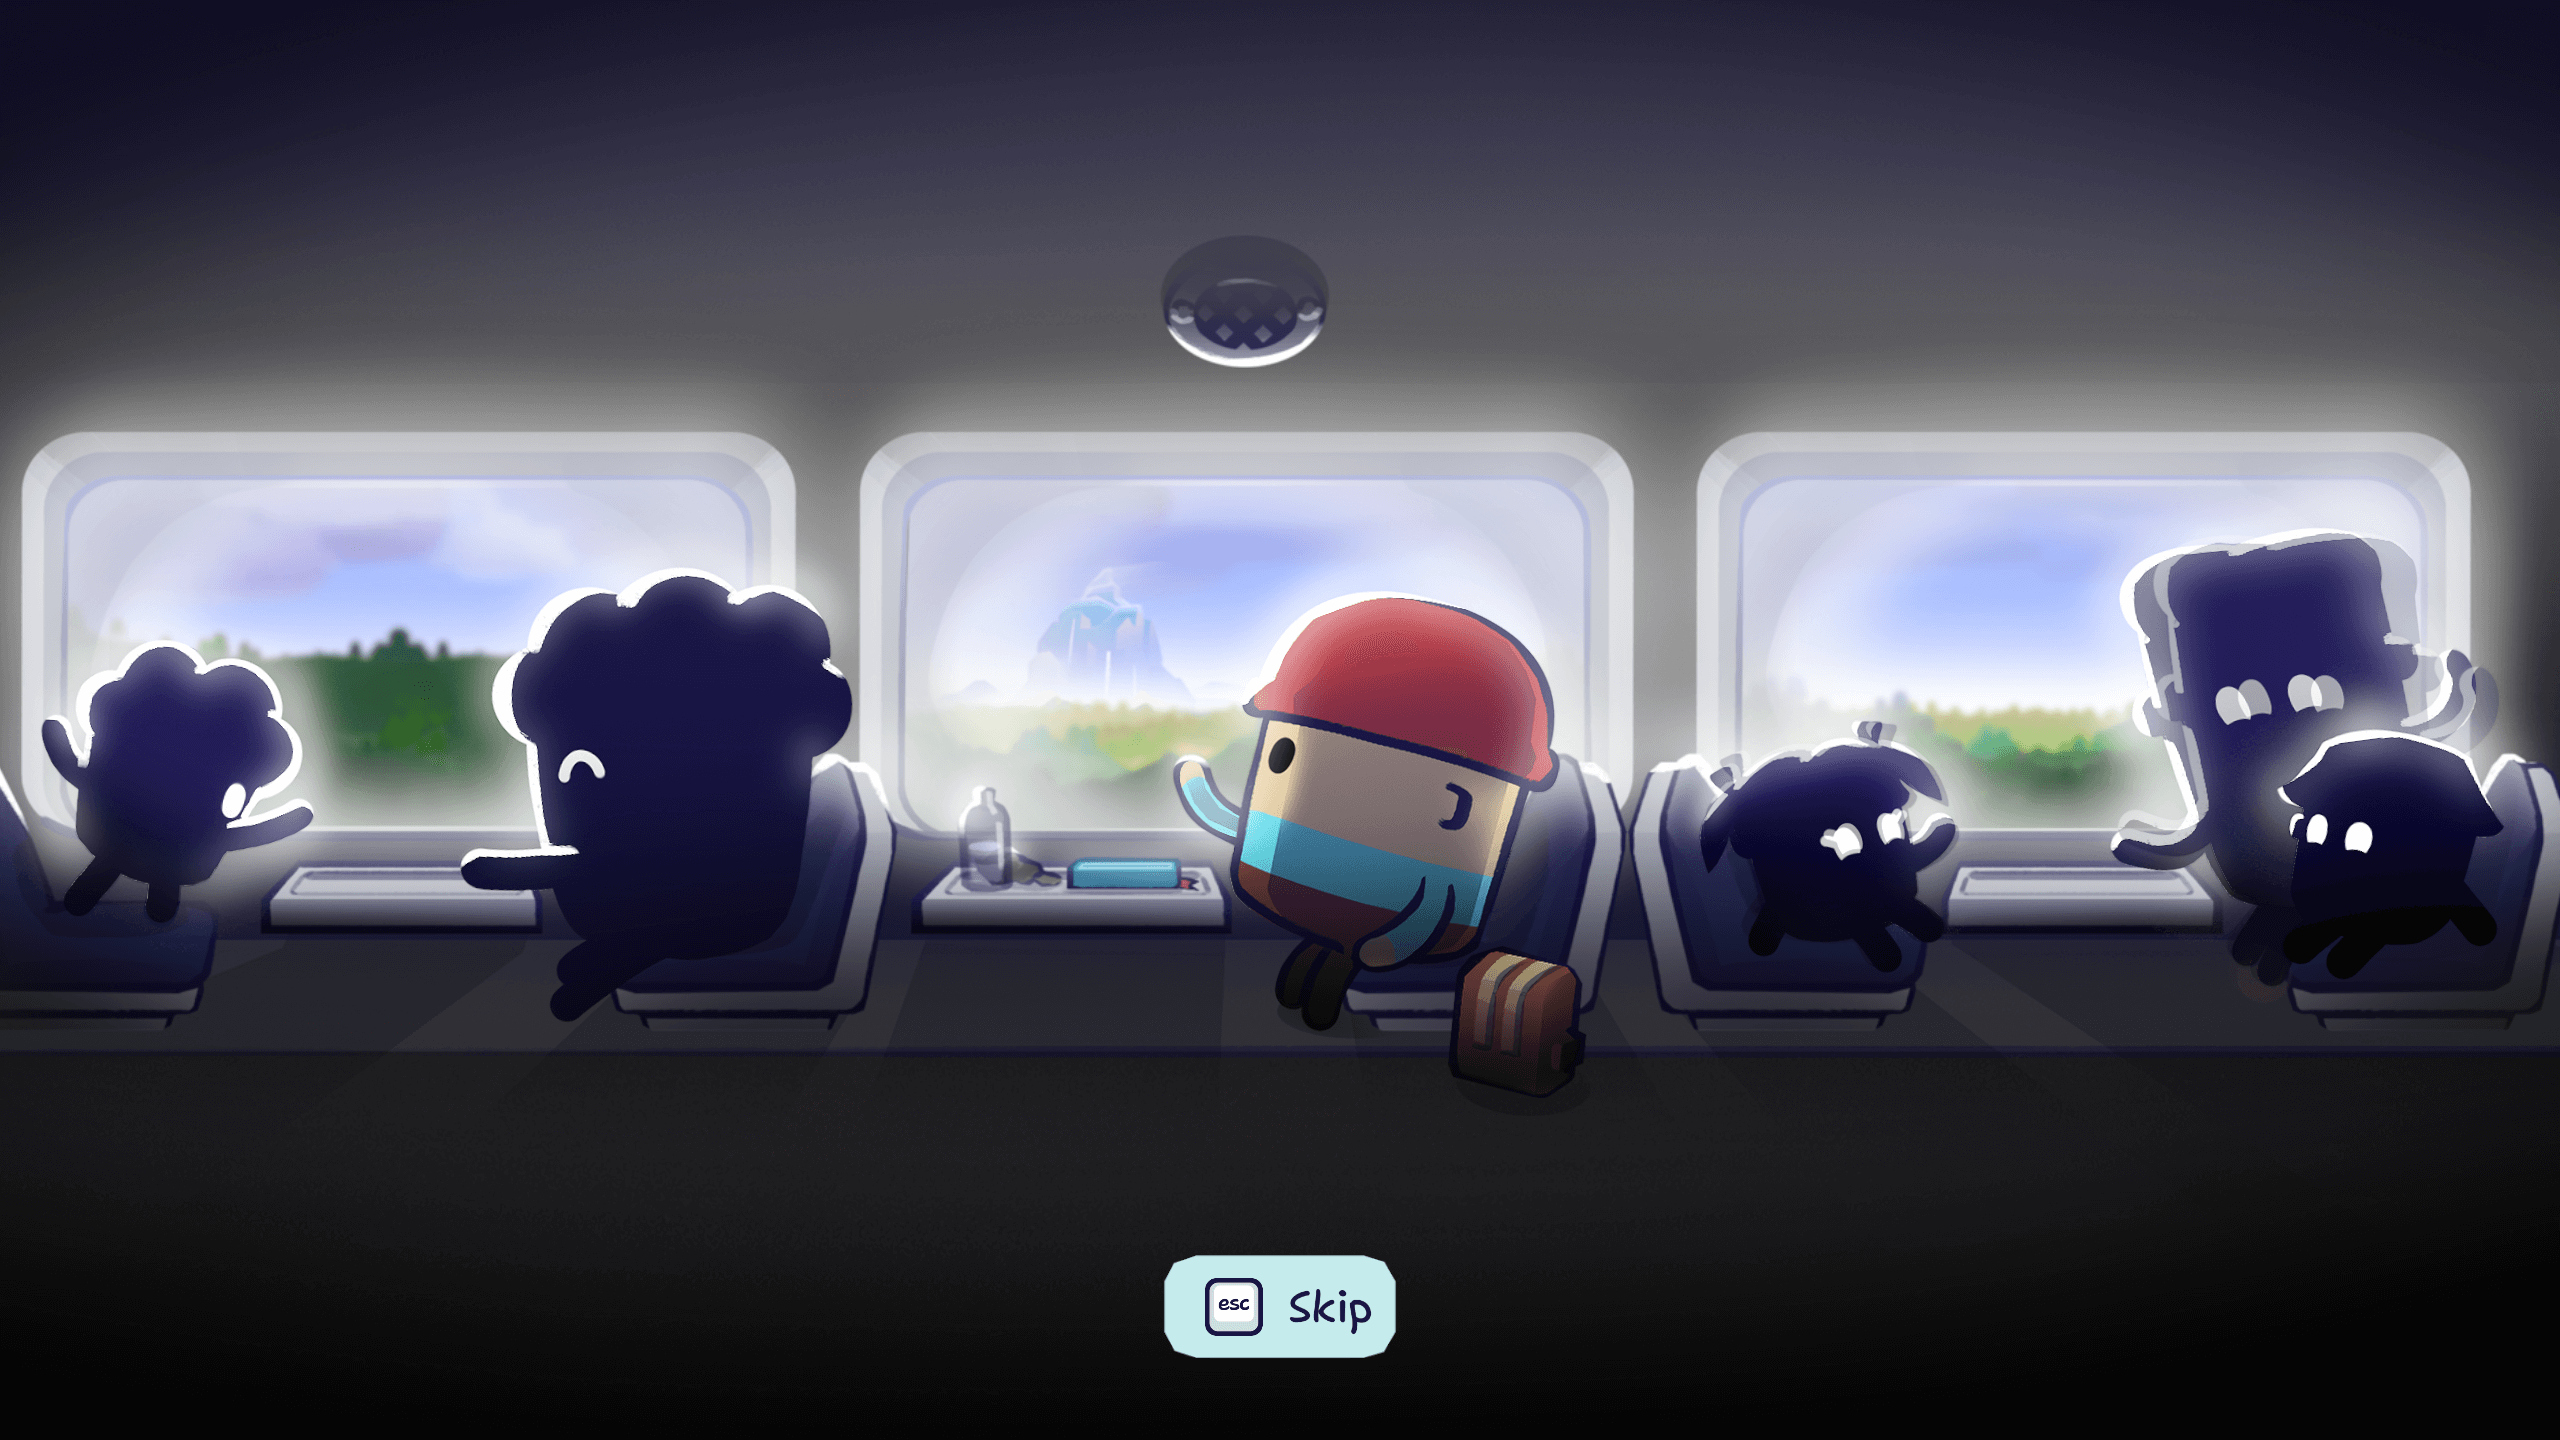 The opening scene in Pine Hearts. You can see the main character, Tyke, in a red hat, blue shirt and brown pants. They are sititng in a busy train carriage. In the distance, you can see see a large mountain. 